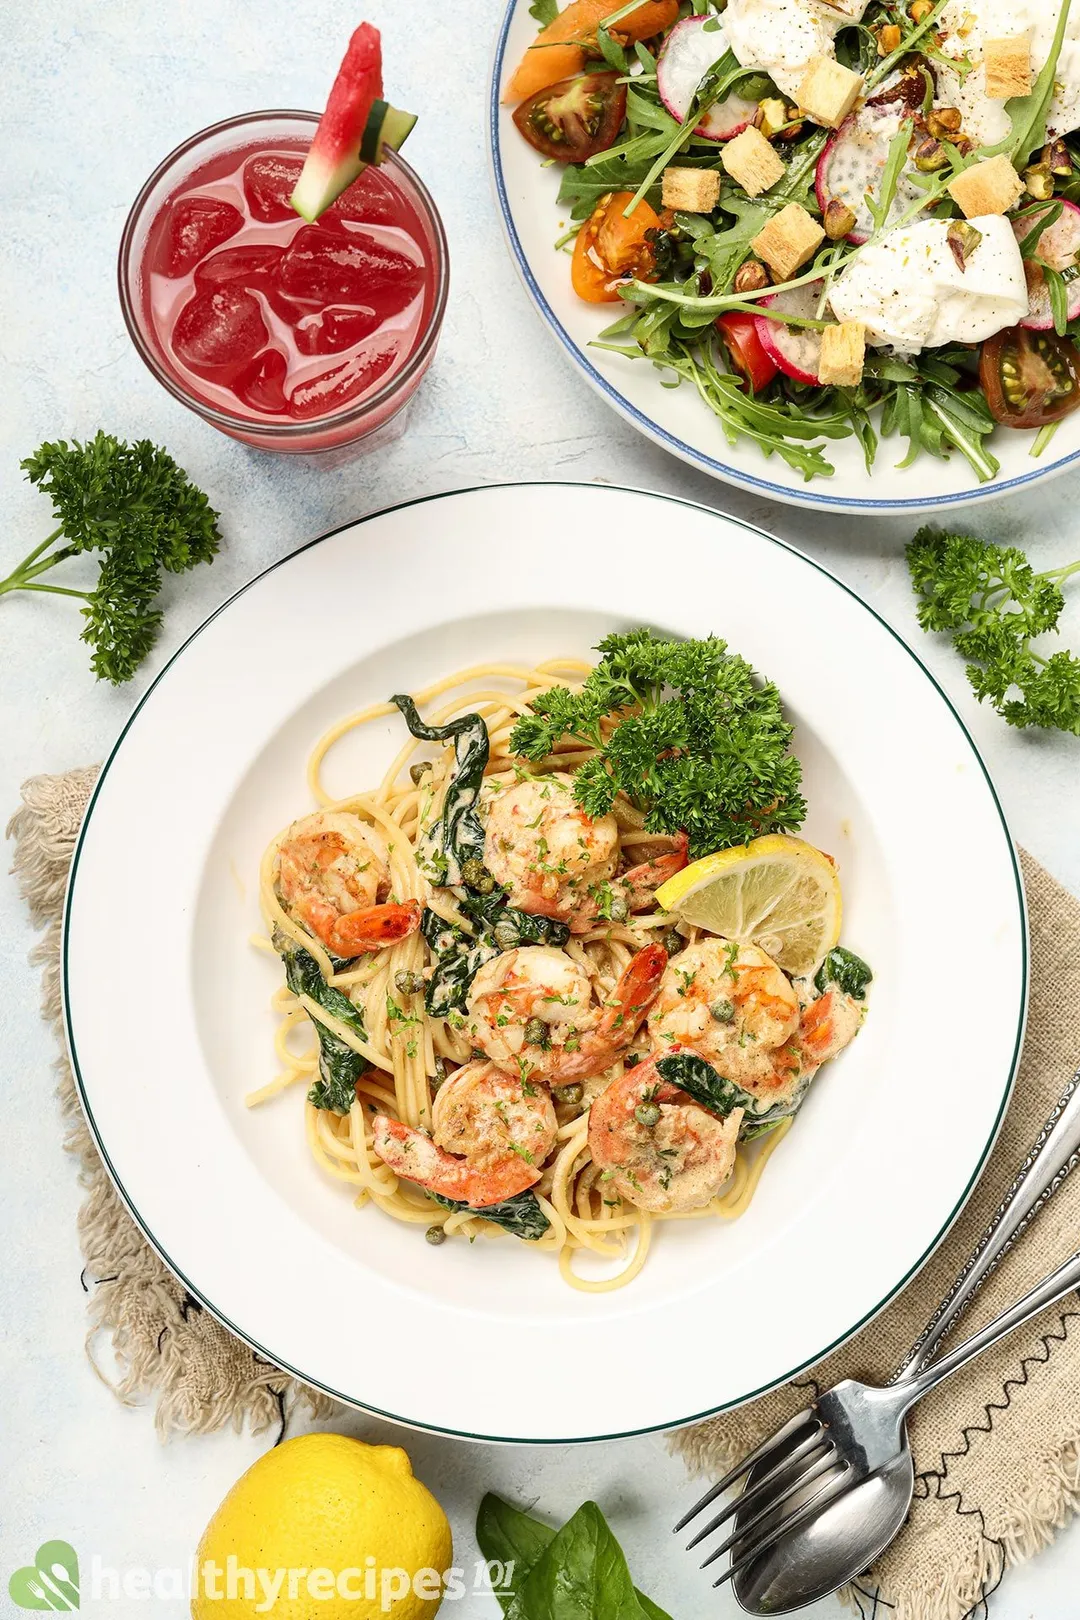 What to Serve With Shrimp Piccata